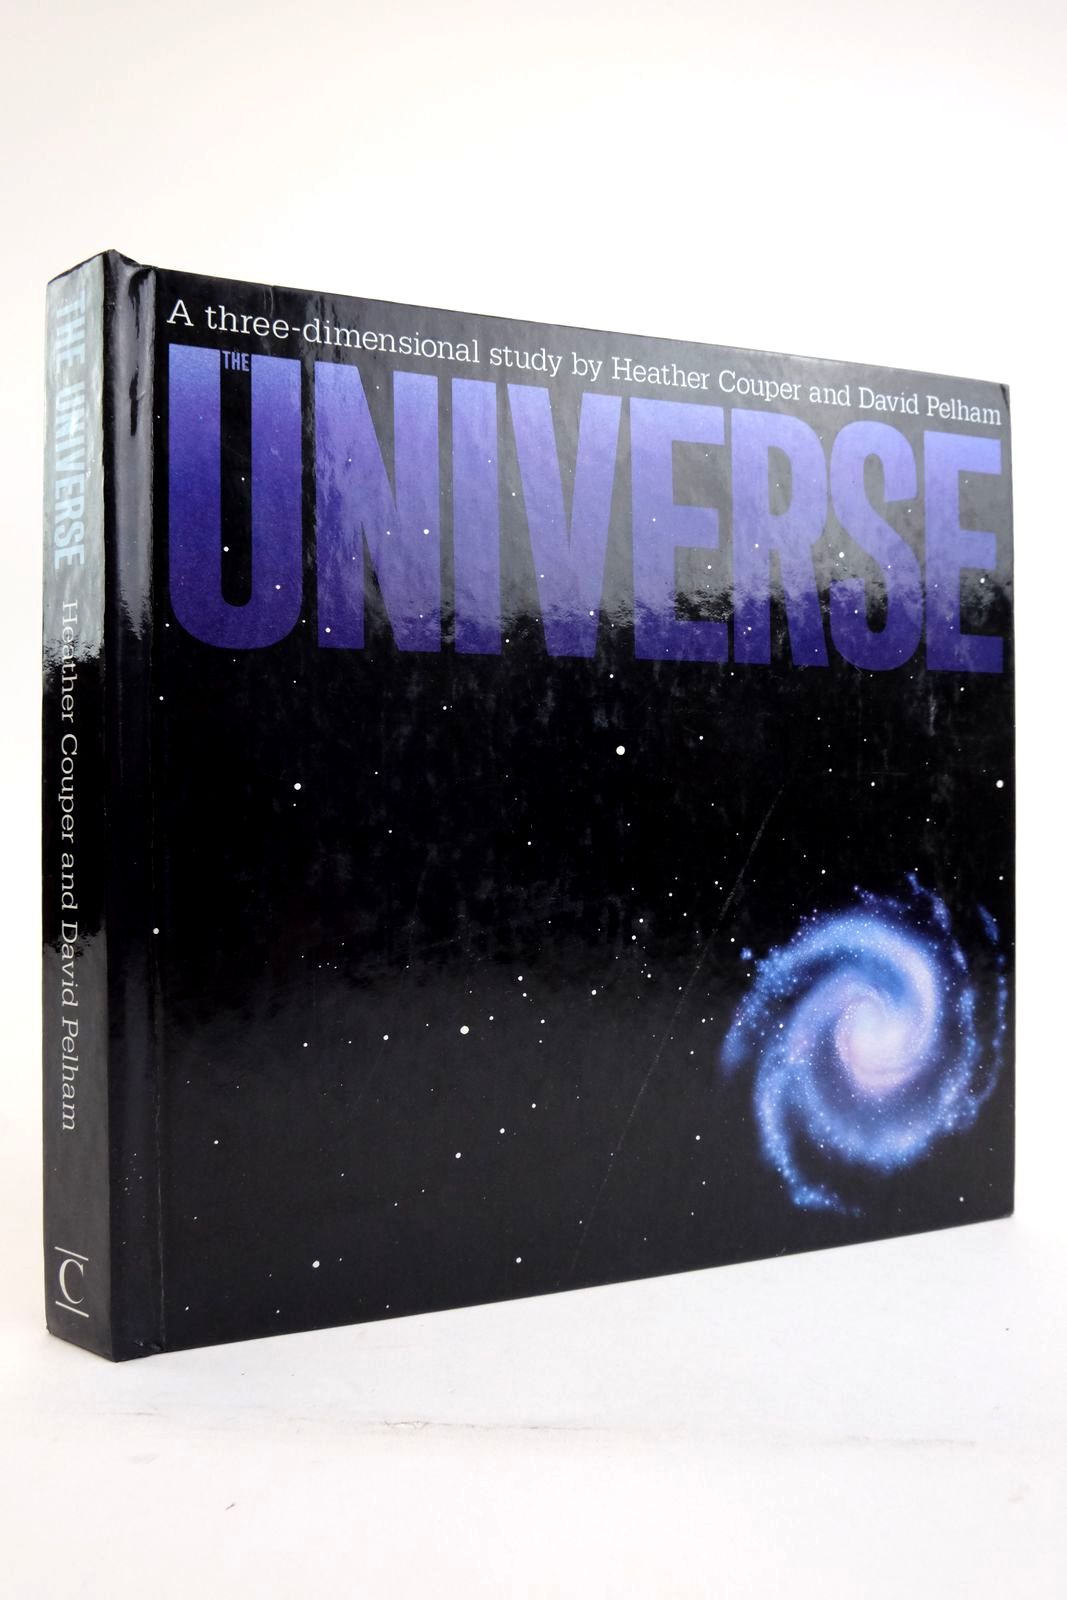 Photo of THE UNIVERSE A THREE-DIMENSIONAL STUDY written by Couper, Heather Pelham, David illustrated by Willock, Harry published by Century Publishing (STOCK CODE: 2135891)  for sale by Stella & Rose's Books